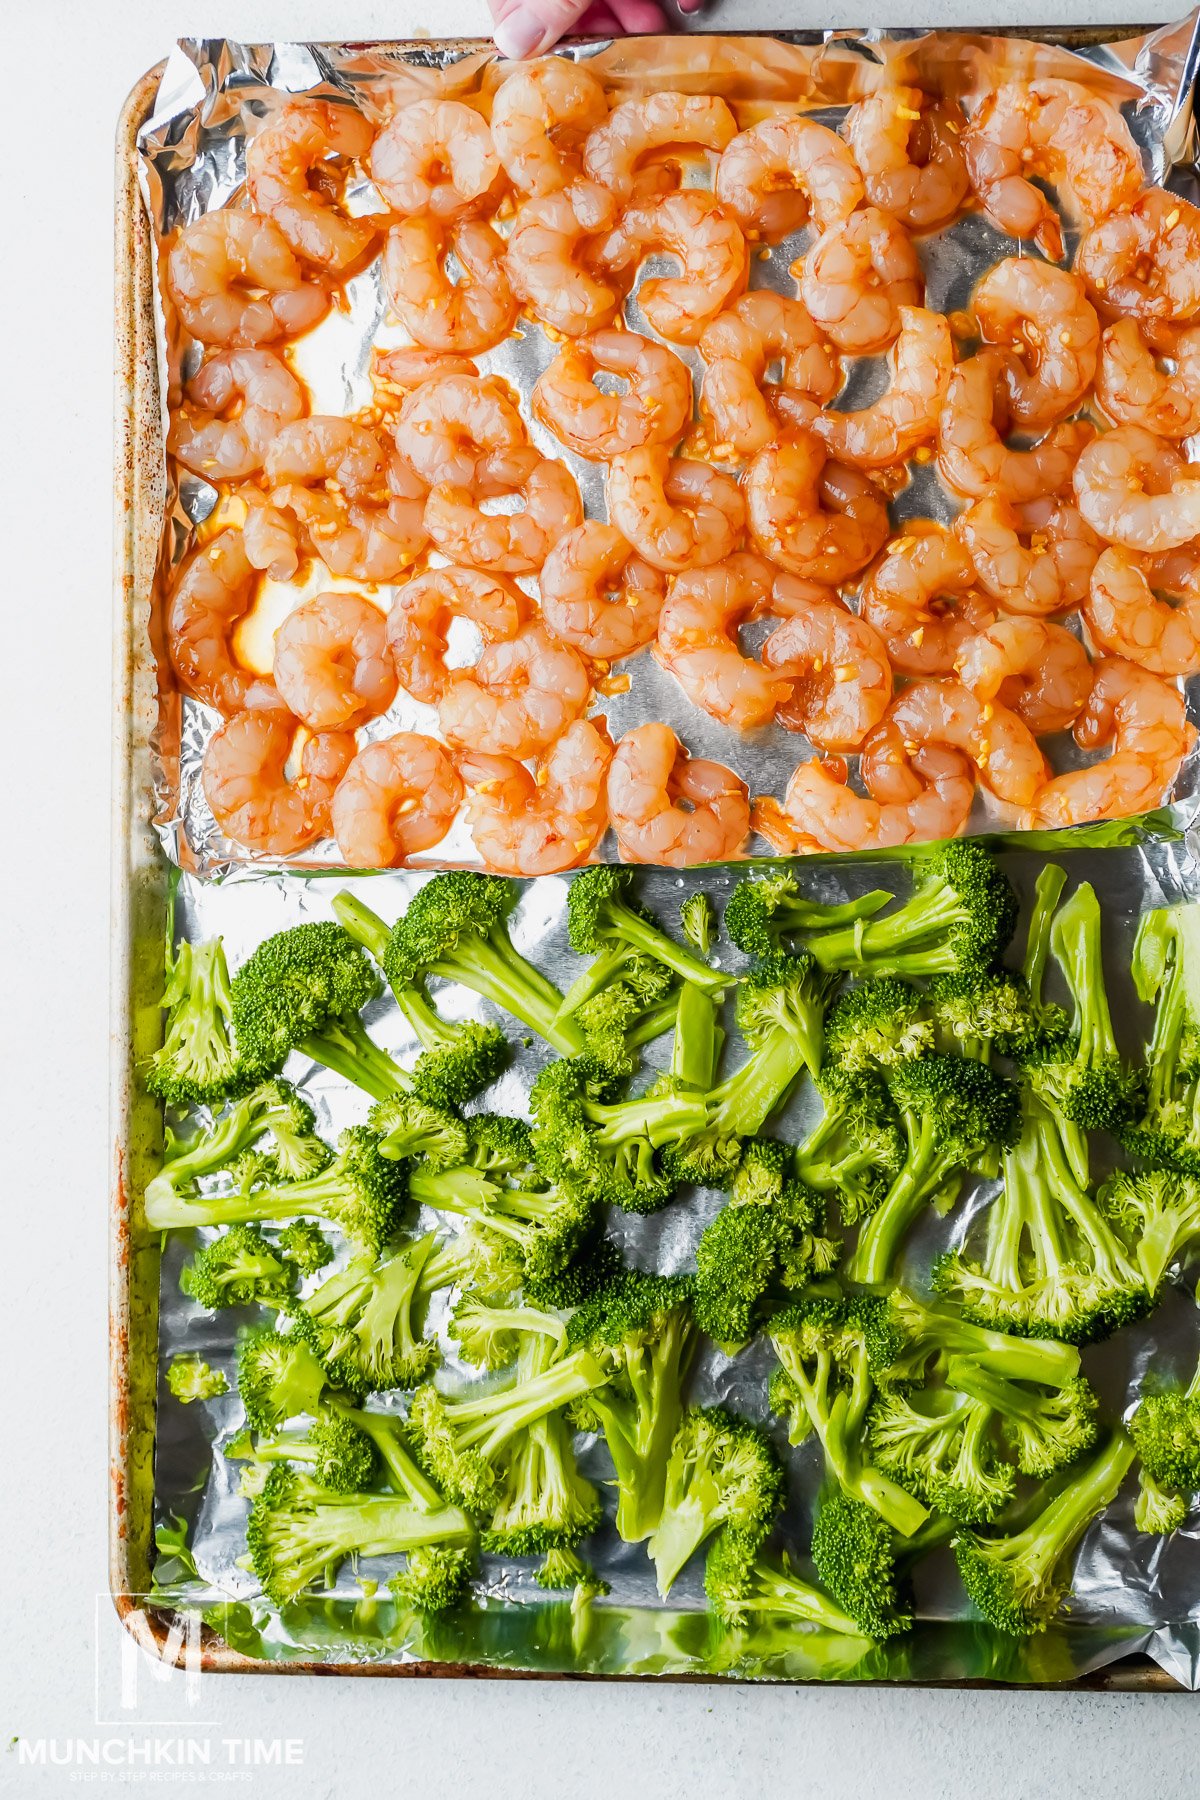 Honey Garlic Shrimp with Broccoli broccoli placed on a baking sheet lined with foil paper, ready for baking. 